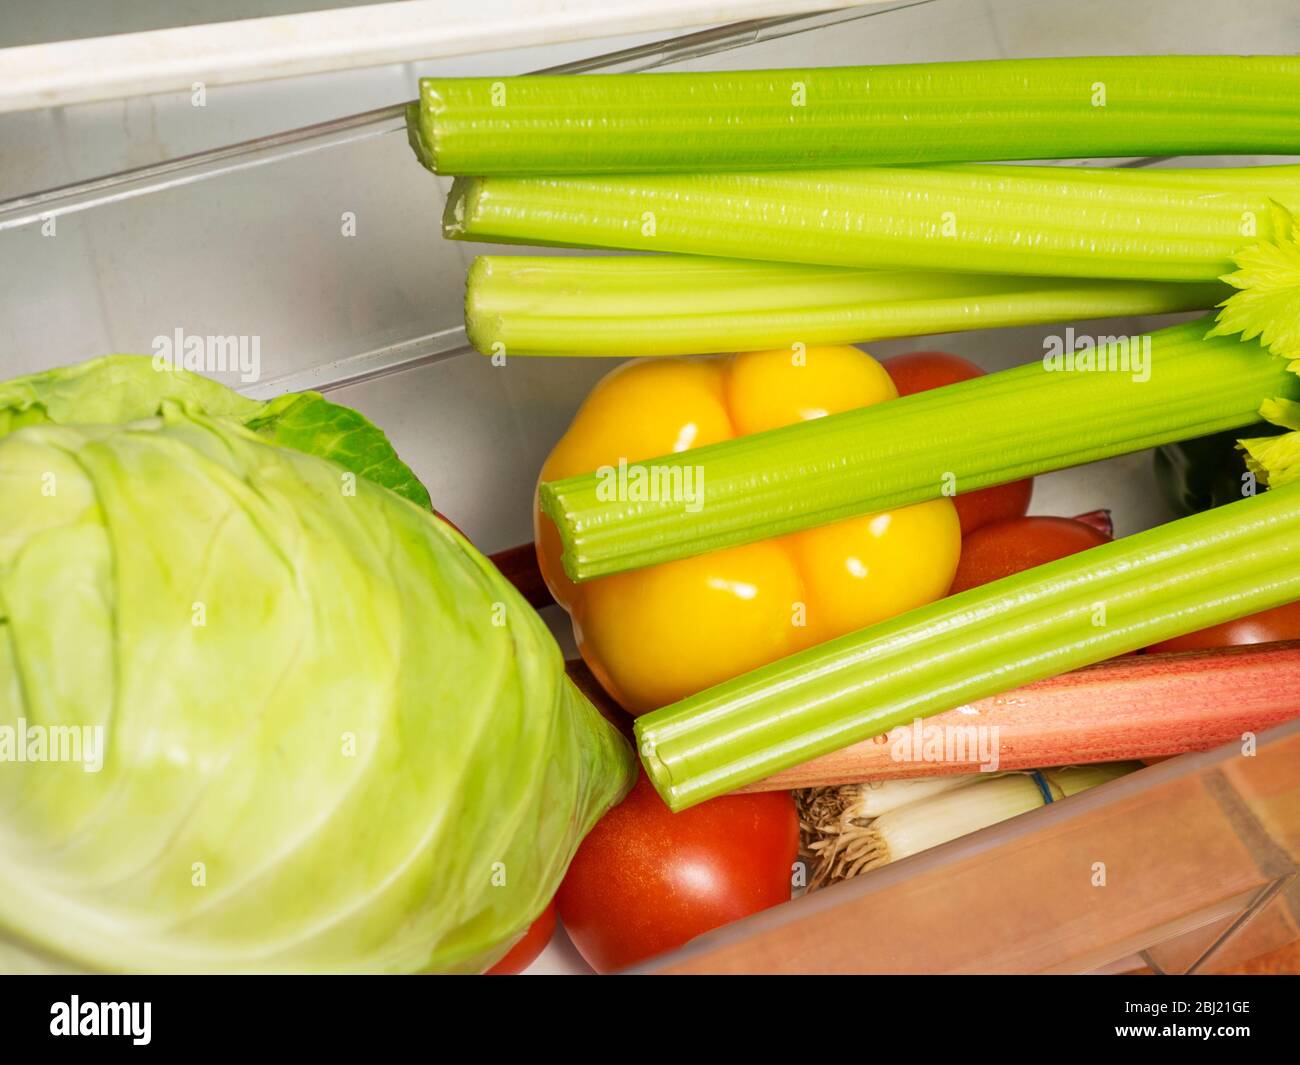 Fresh vegetables in the salad crisper drawer in a refrigerator Stock Photo